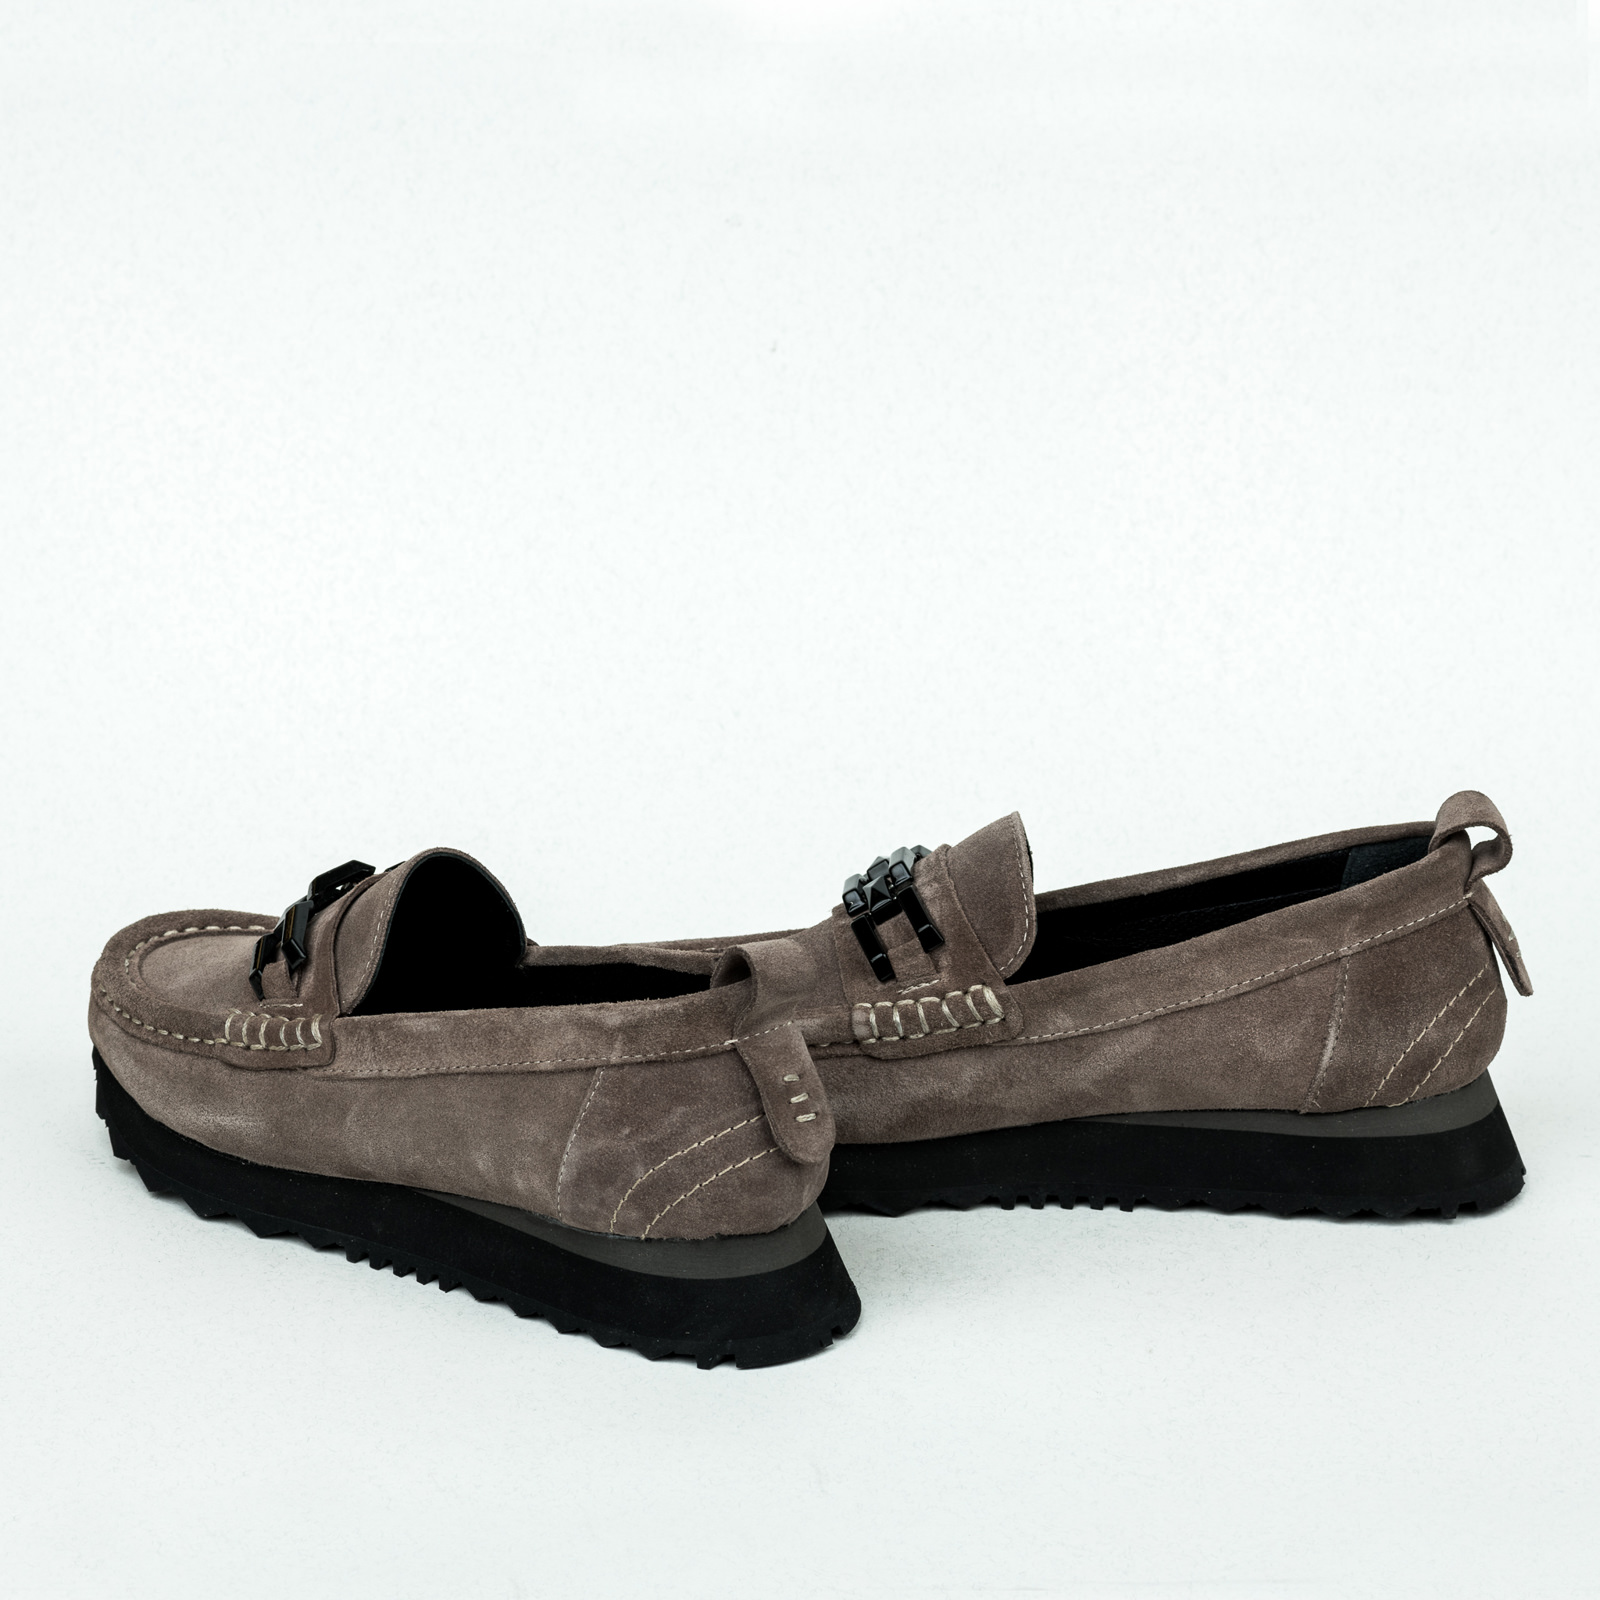 Leather shoes & flats B186 - CAPPUCINO